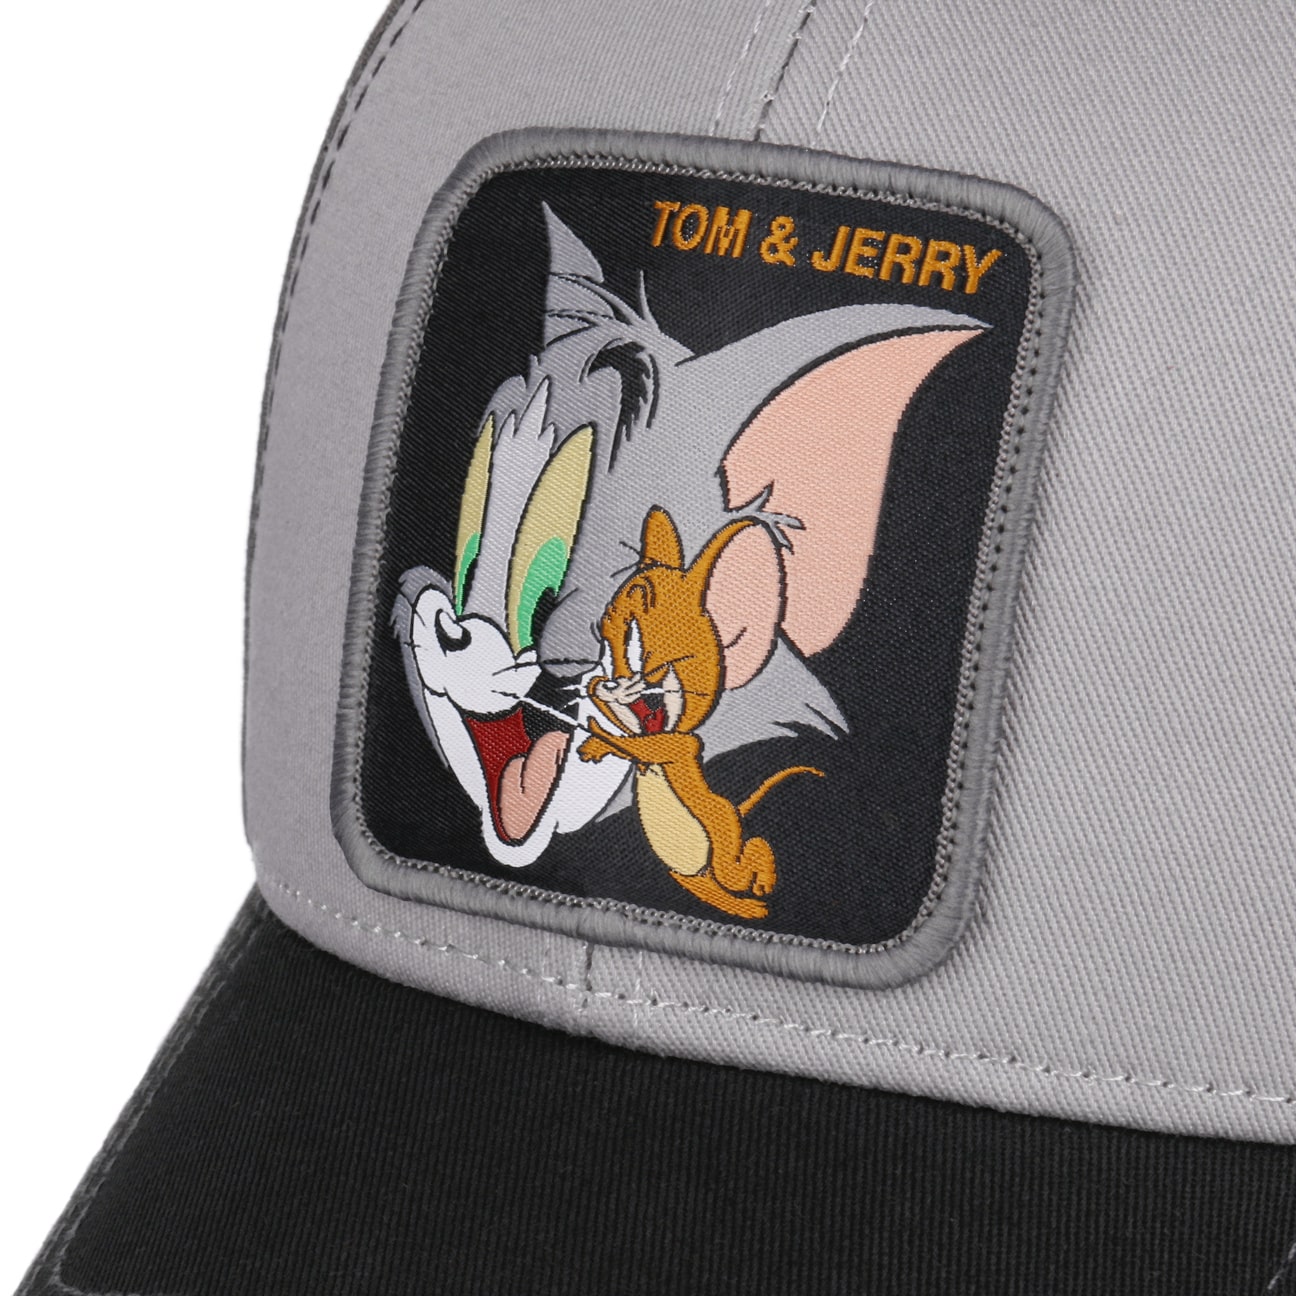 Tom & Jerry Cap by Capslab - 37,95